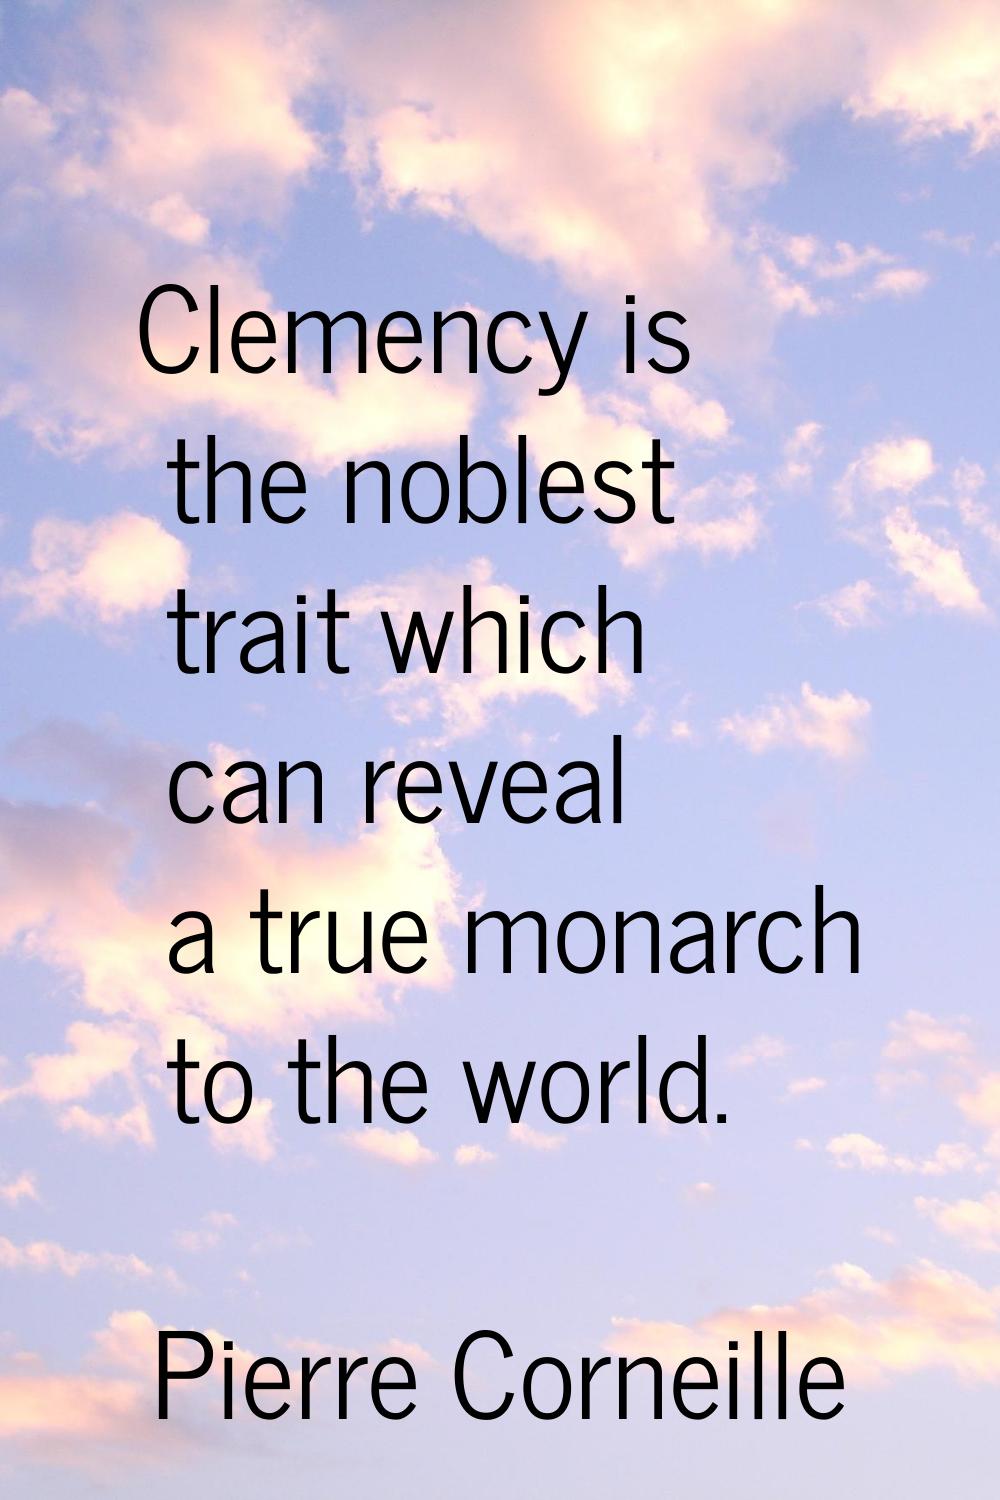 Clemency is the noblest trait which can reveal a true monarch to the world.